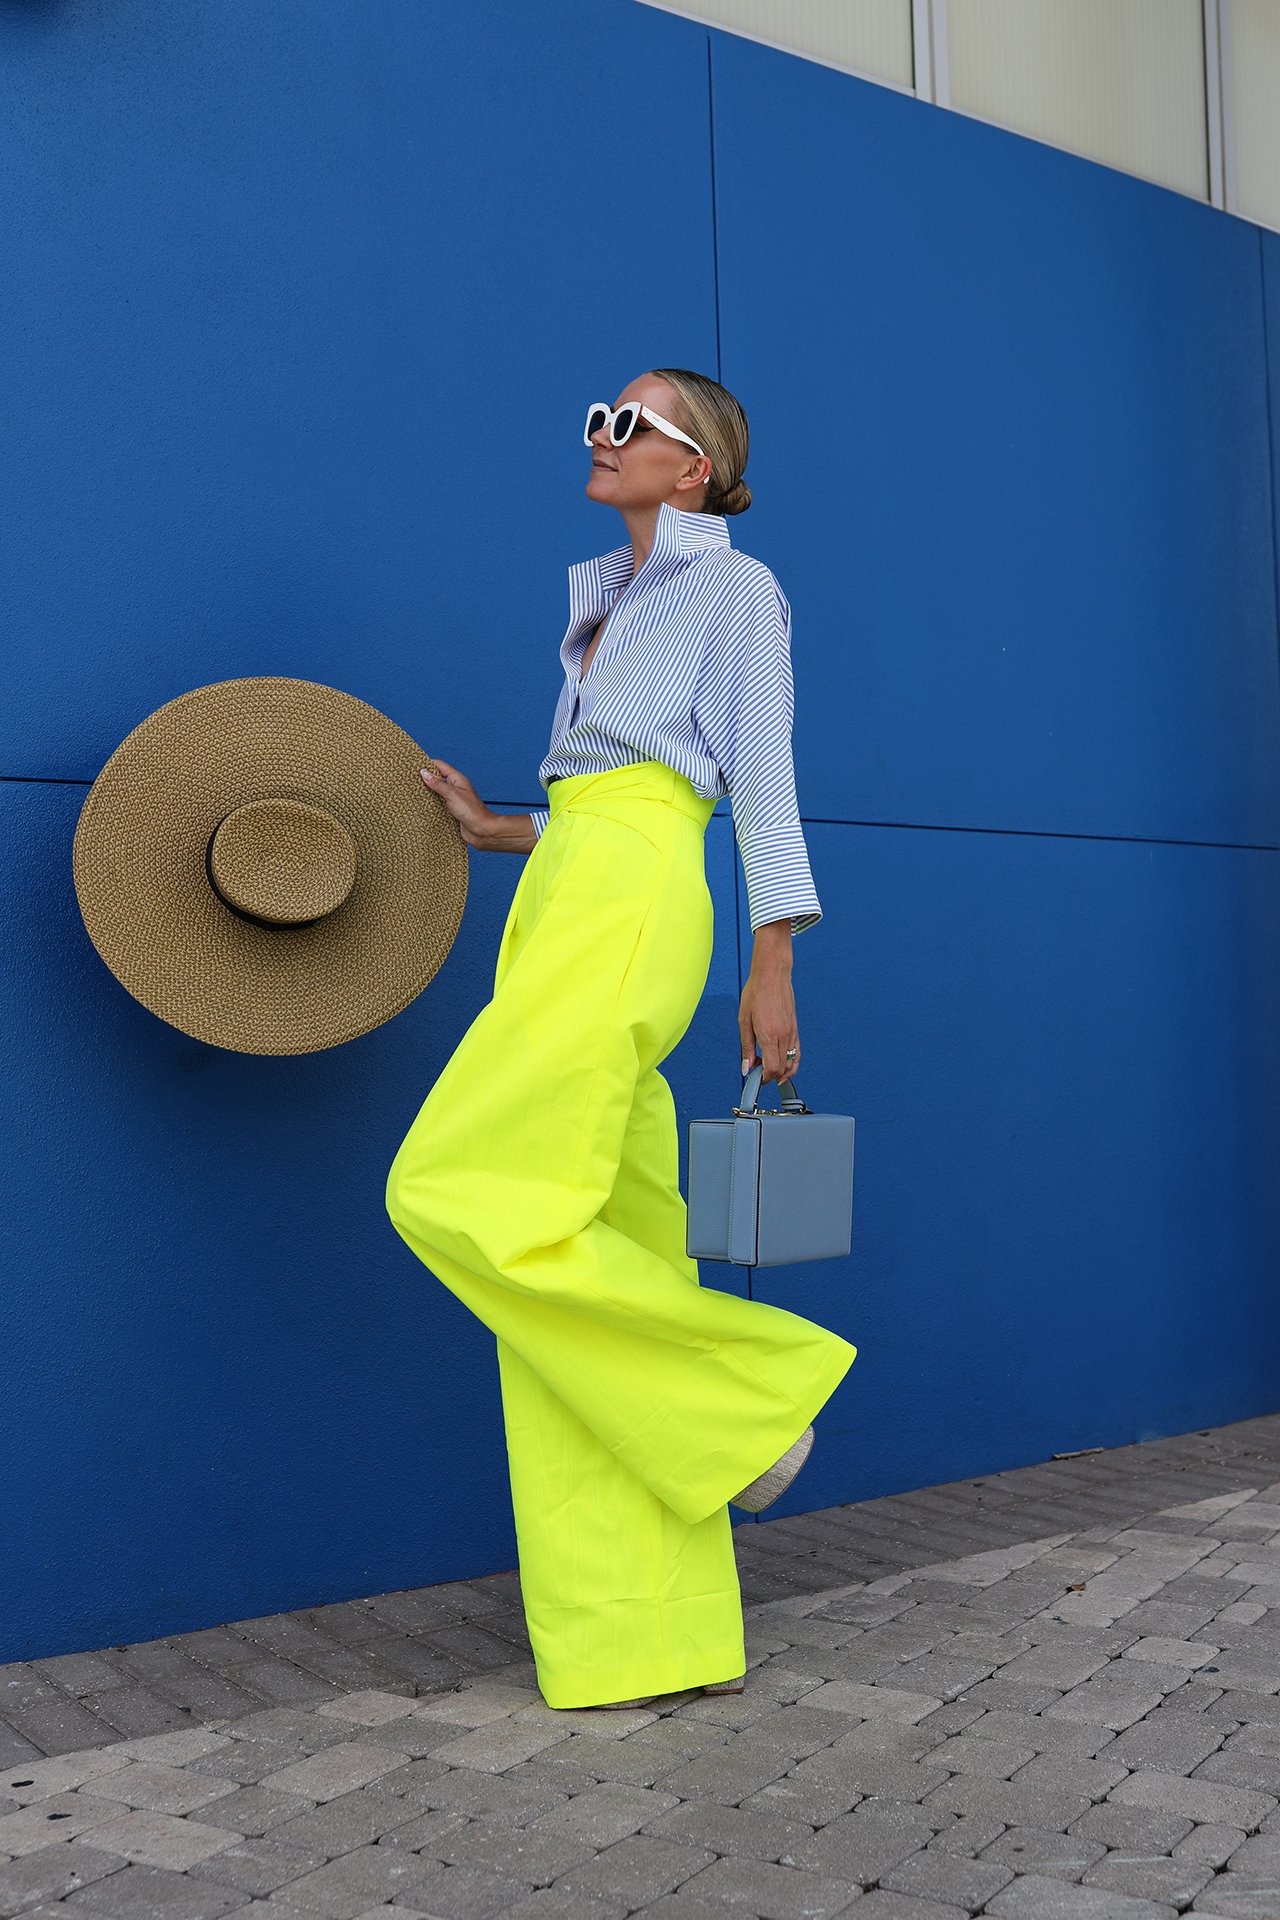 Wide Leg Pants Outfit Ideas: How to Style Successfully